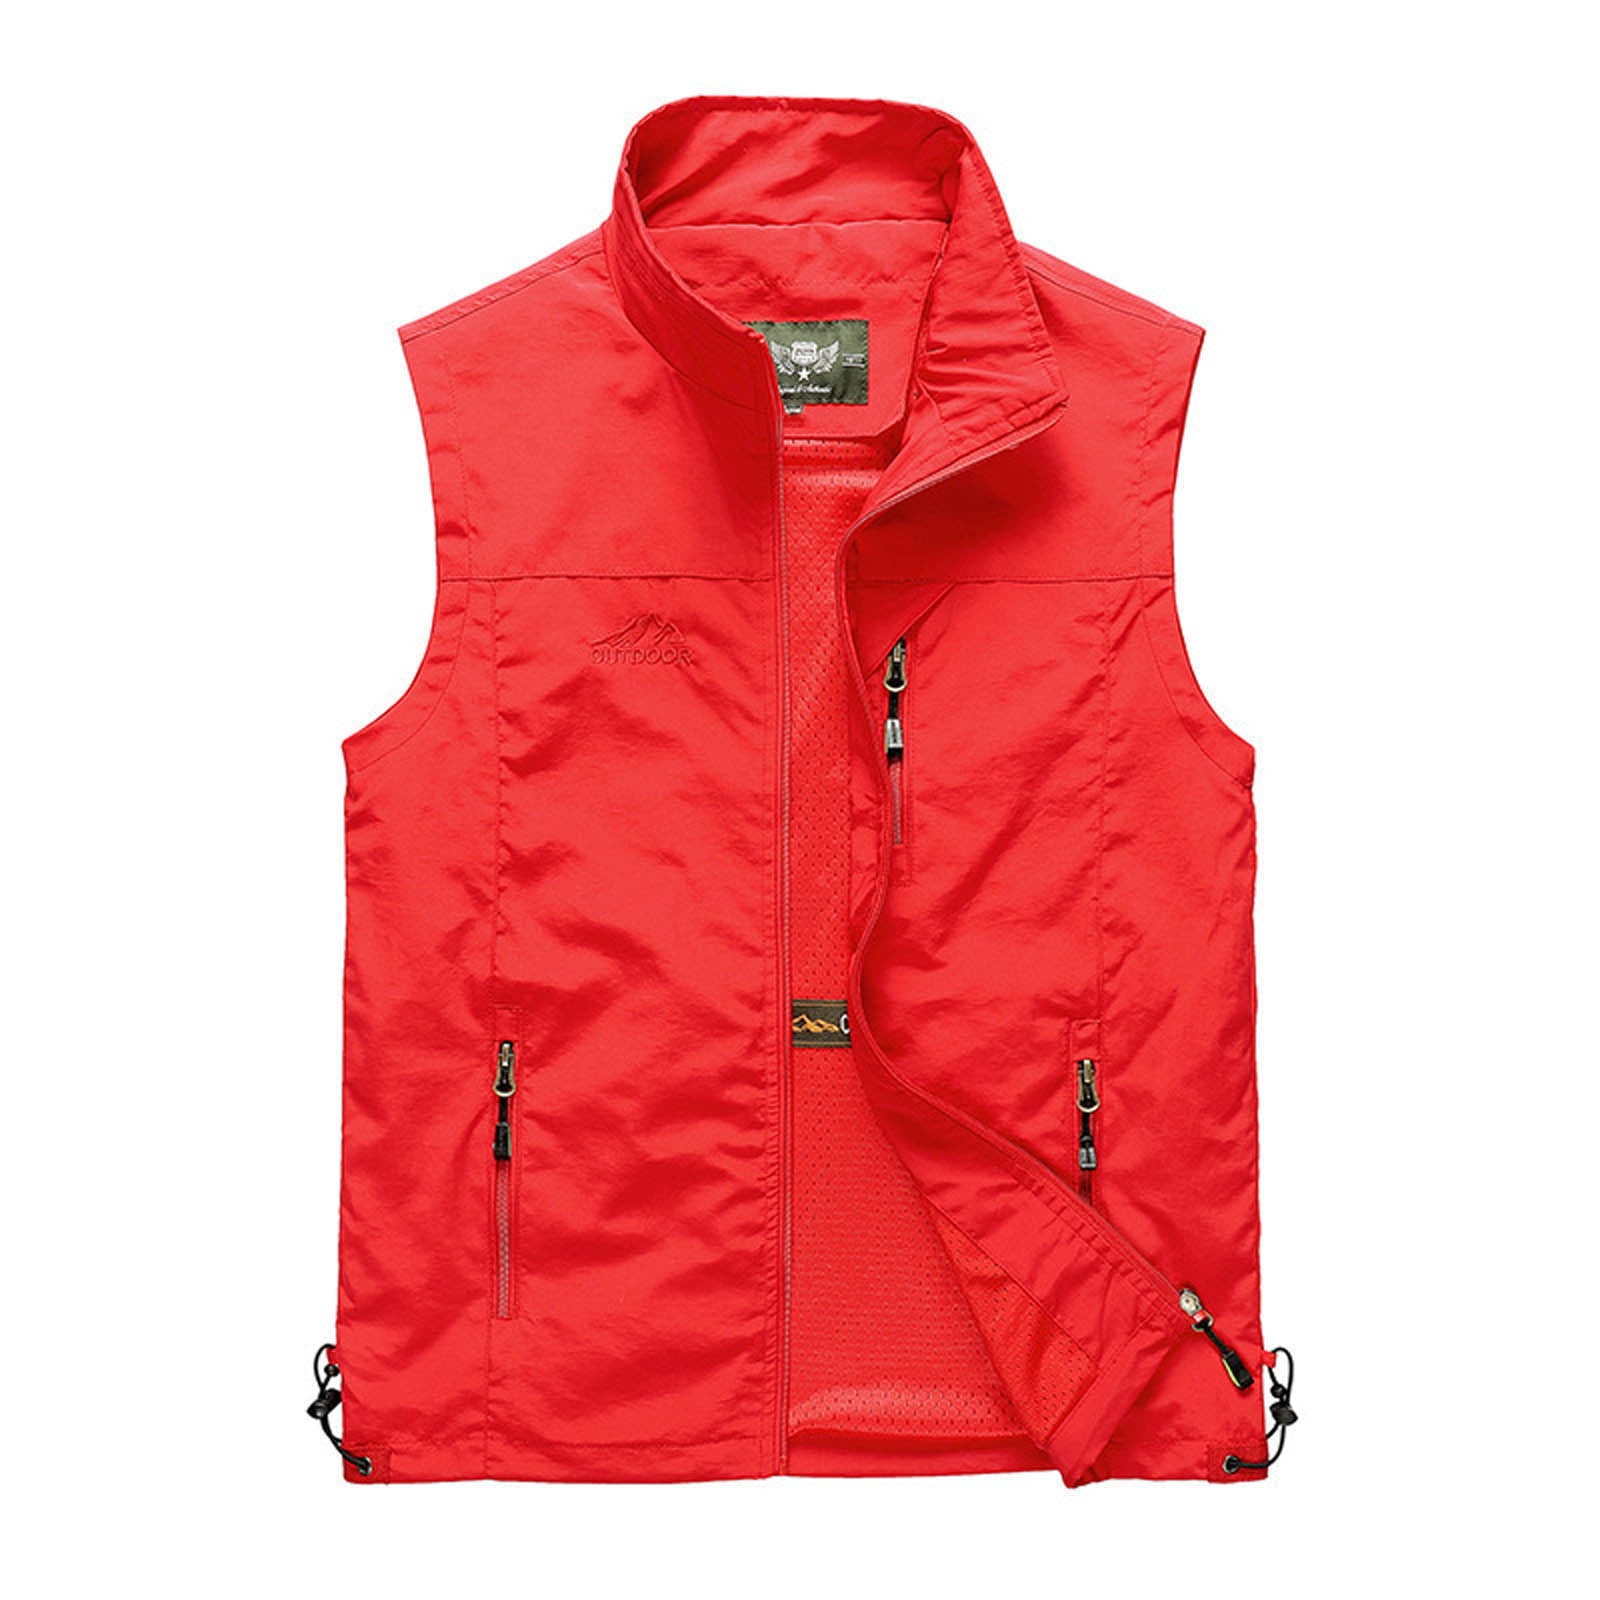 Simplmasygenix Clearance Men's Sleeveless Jacket Casual Coat Work Clothes  Jacket Solid Color Stand Collar Multiple Pockets Outdoor Sports Photography  Leisure Vest Coat 